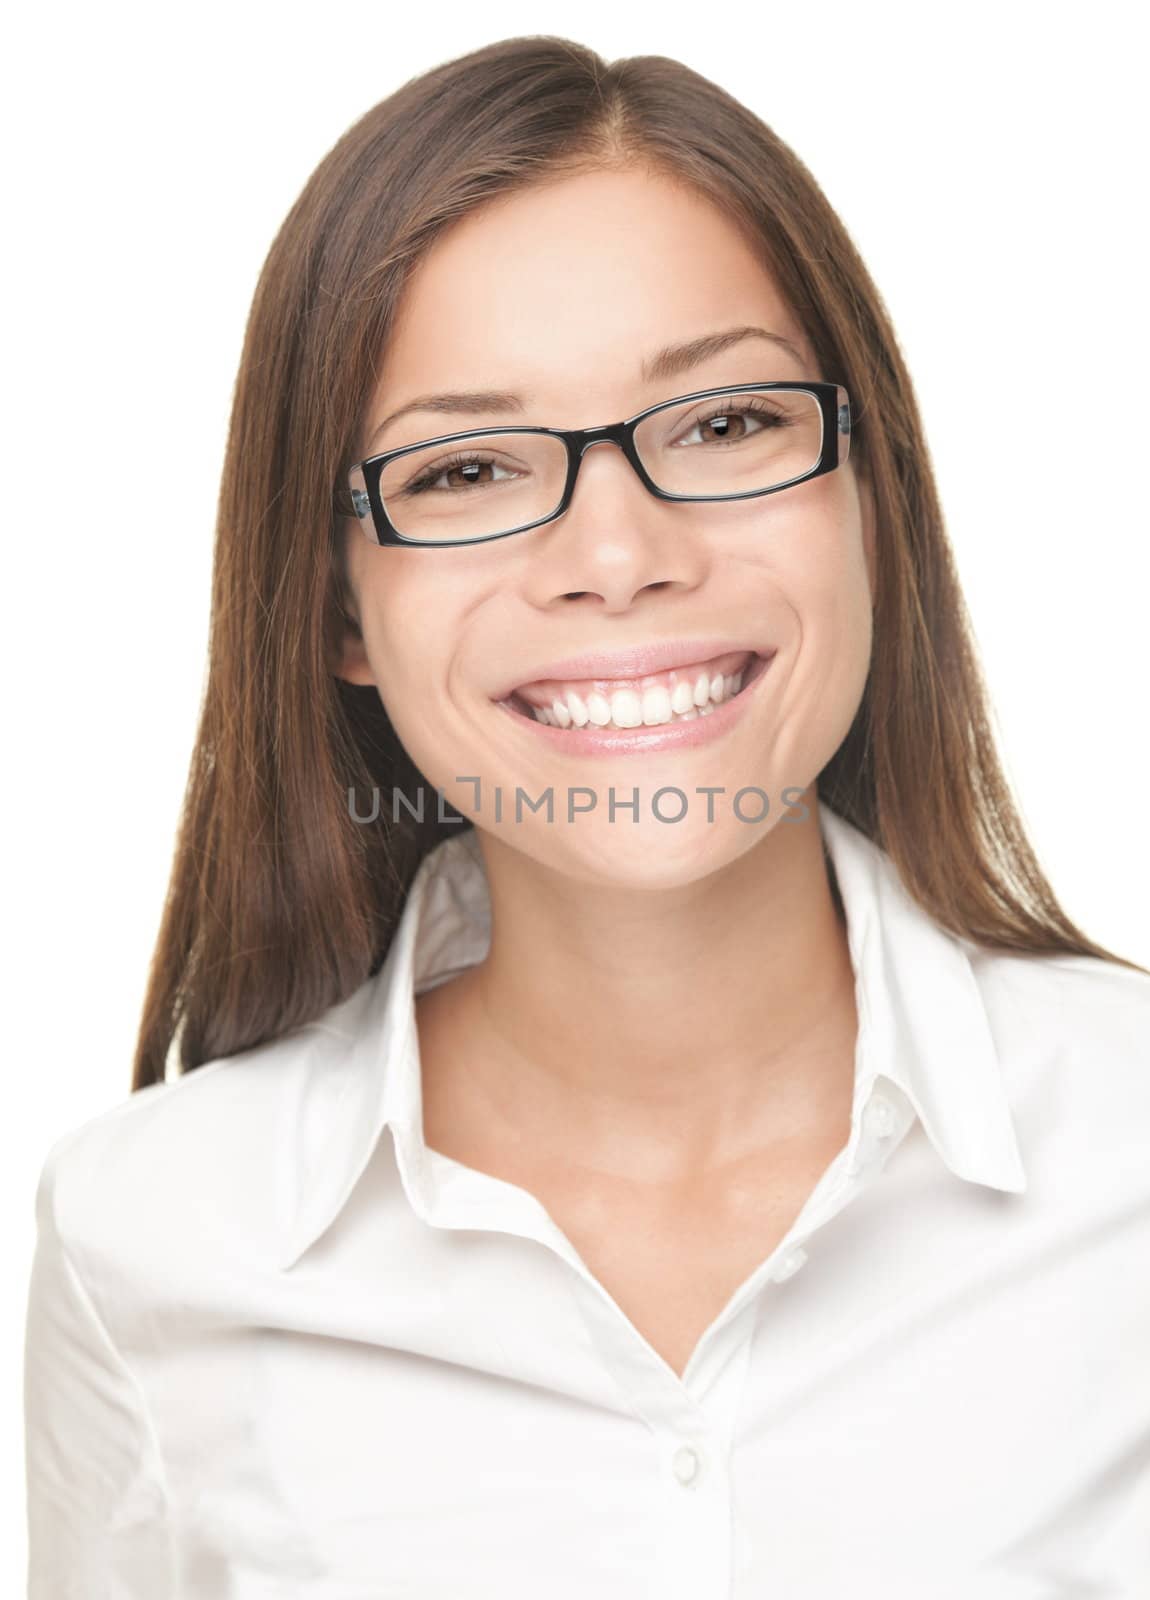 Portrait of smiling young professional woman wearing glasses. Closeup portrait of beautiful happy Chinese Asian / Caucasian female model.